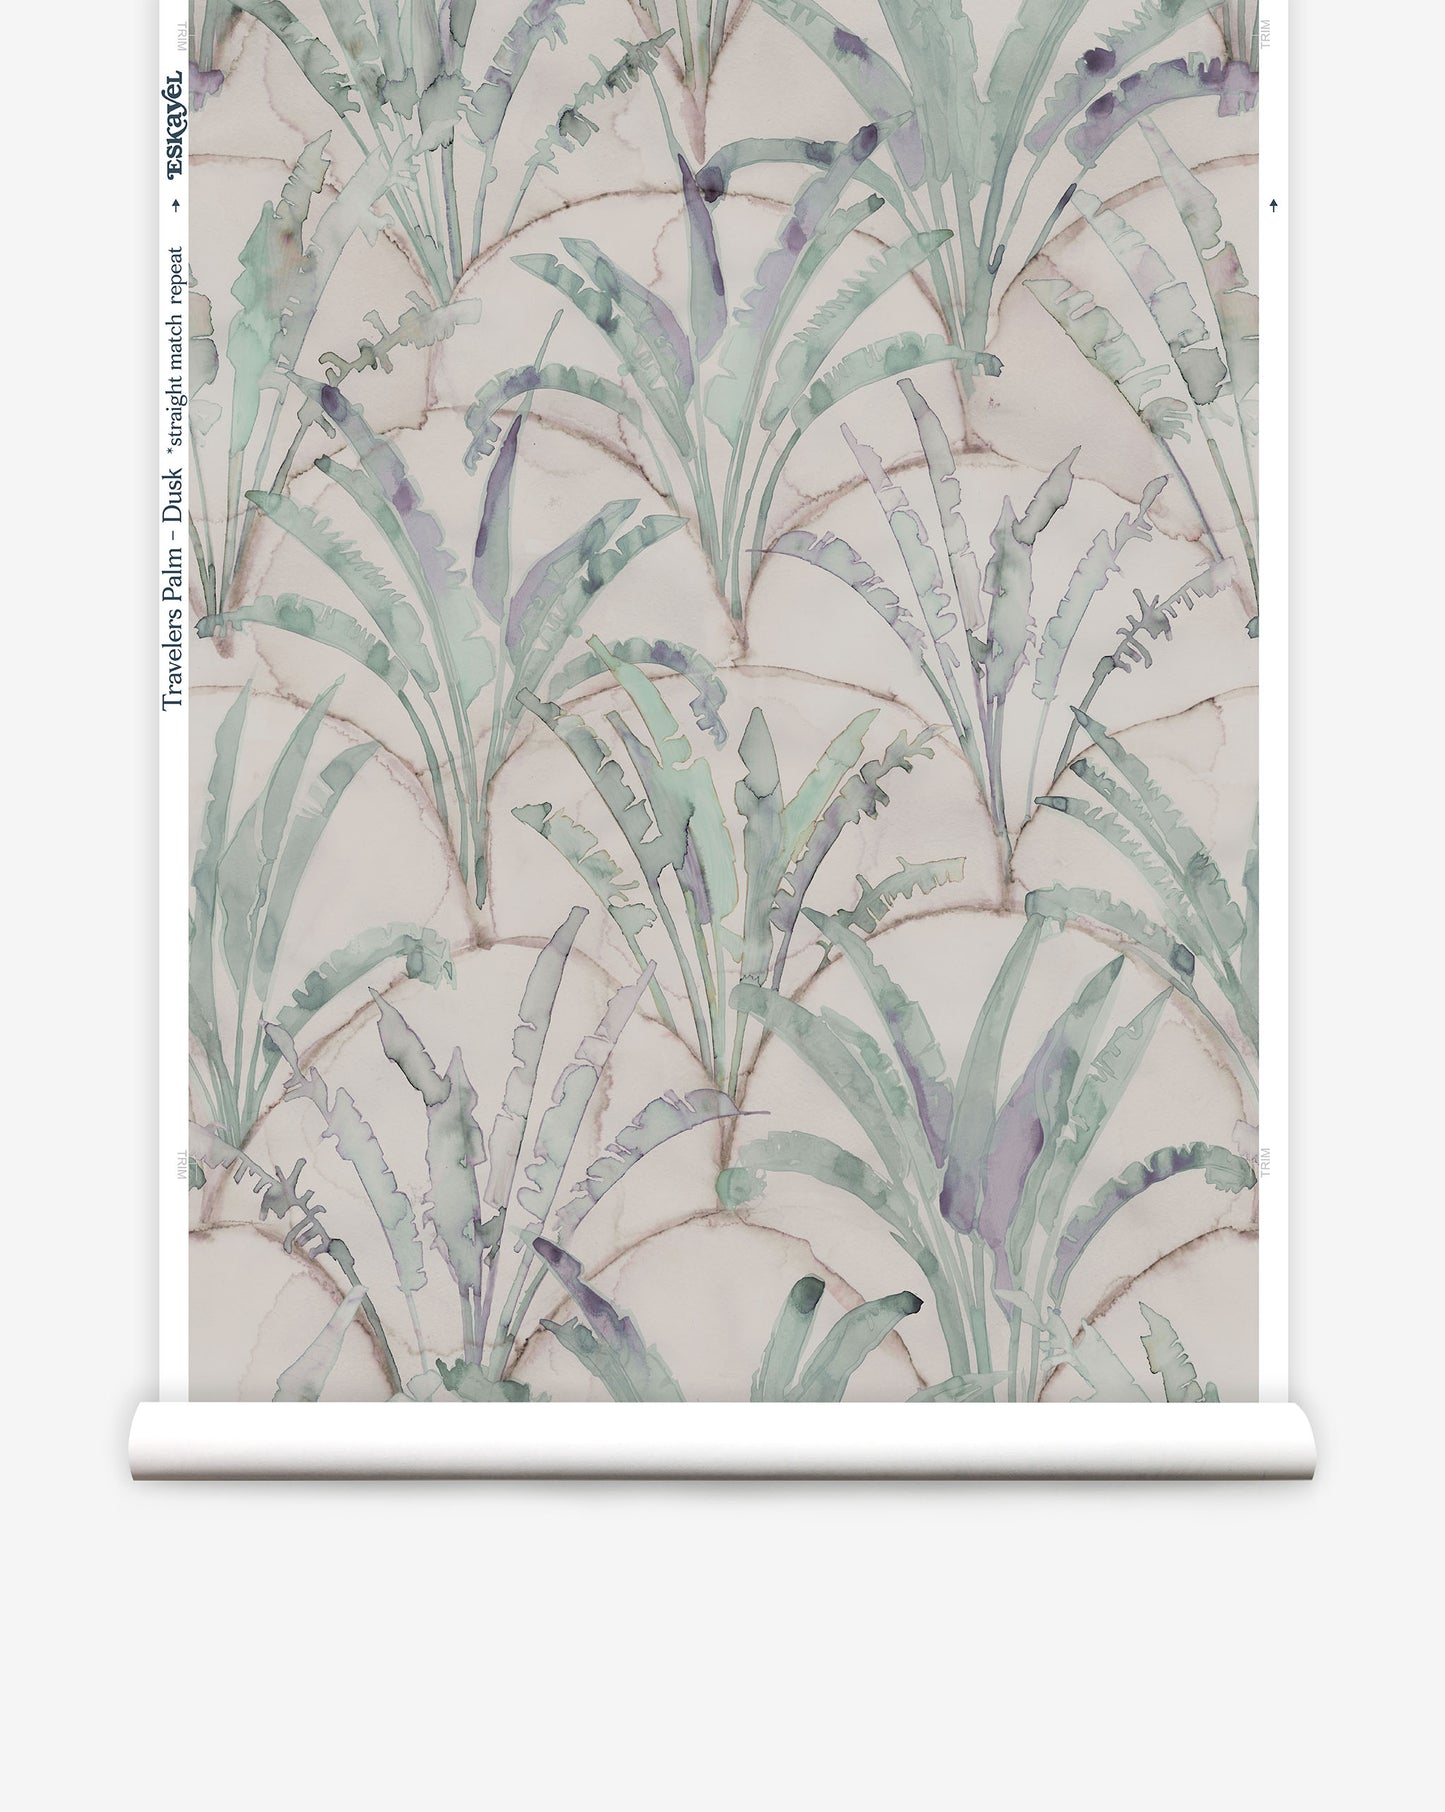 Travelers Palm presents repeating trees against a background of overlapping scallops The Dusk colorway is mainly green and beige